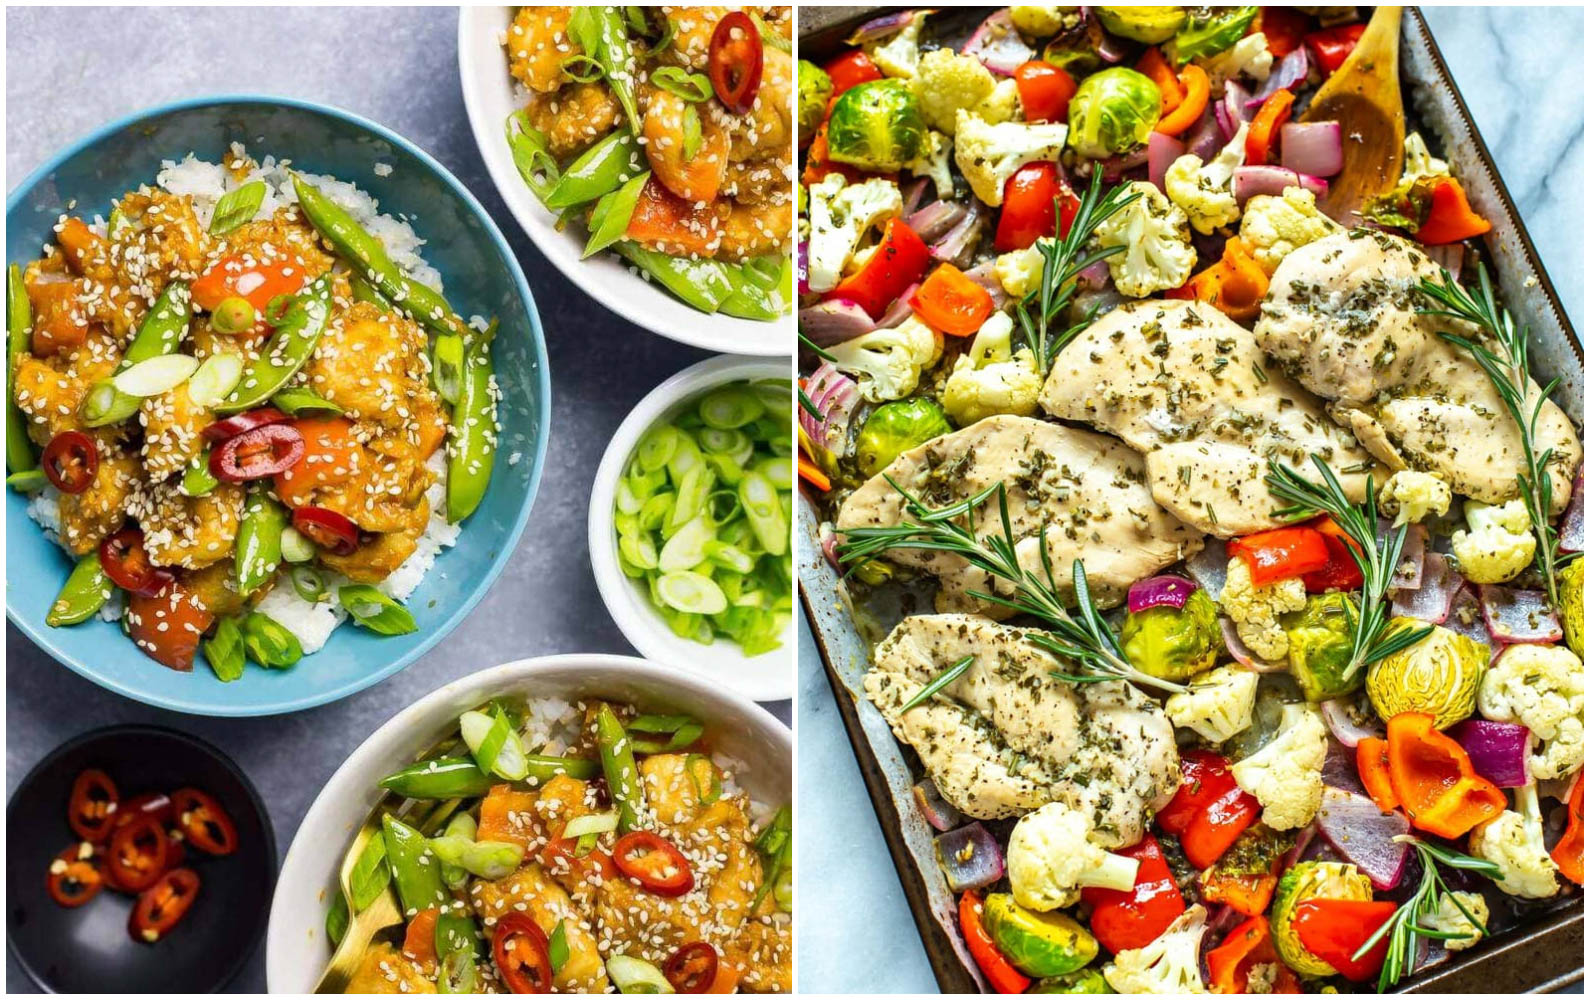 Healthy 30 Minute Meals for Weeknight Dinners